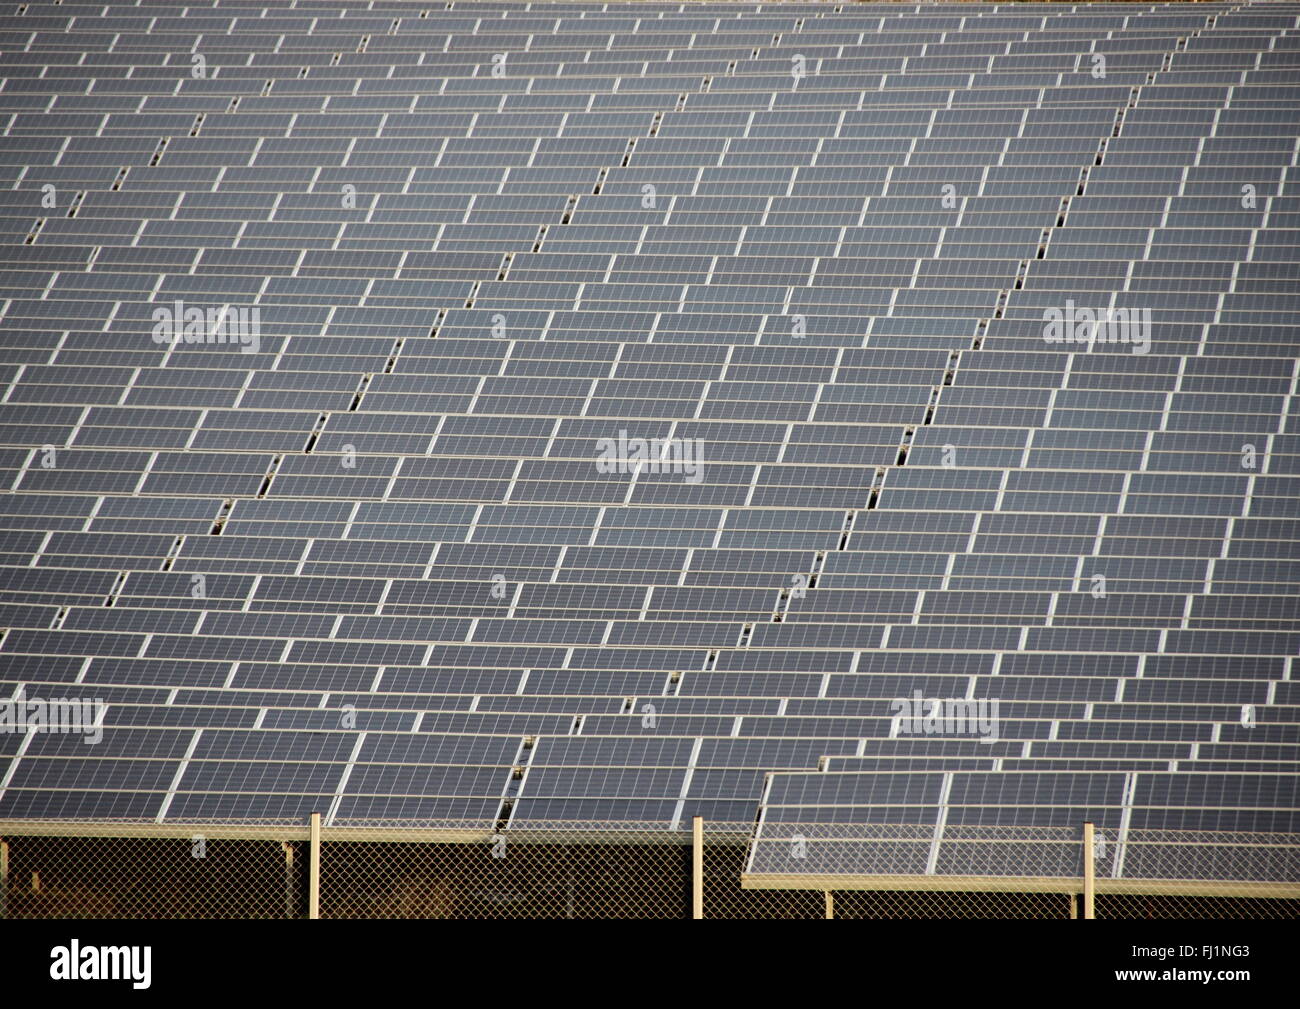 Large Sun Solar Industrial Field Plant Closeup with Fence Stock Photo